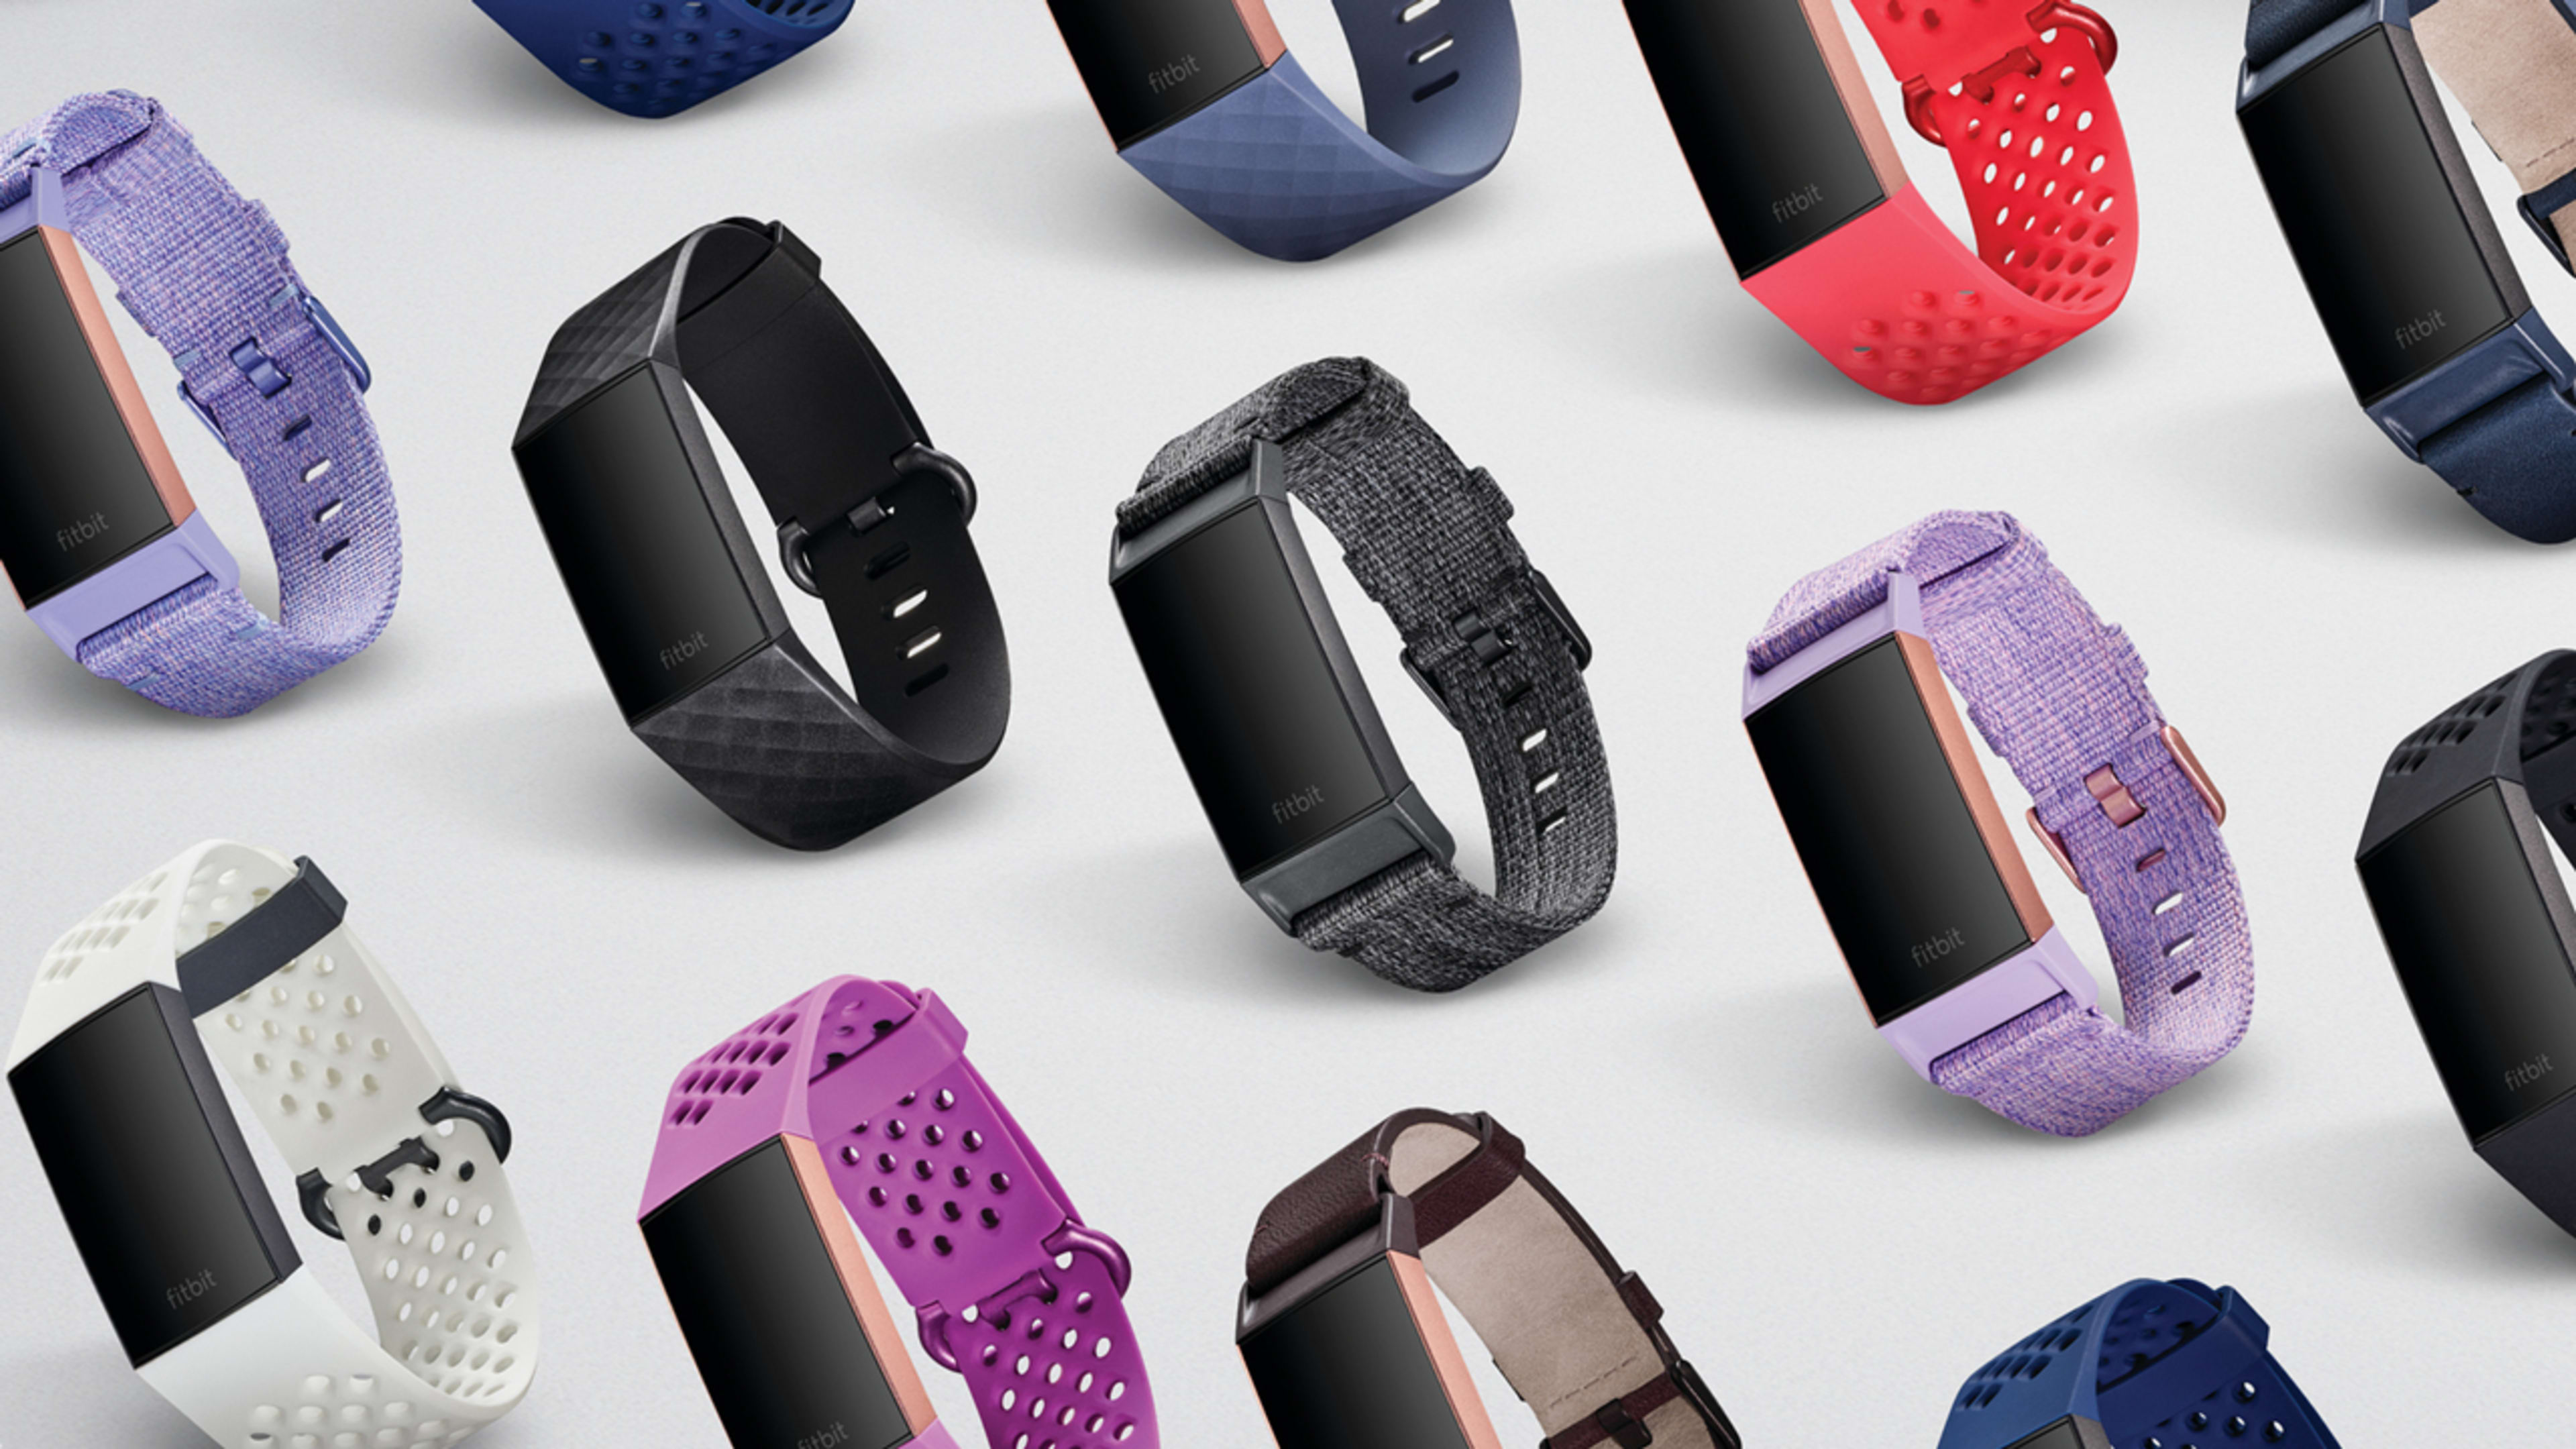 Fitbit wants to get in your bed